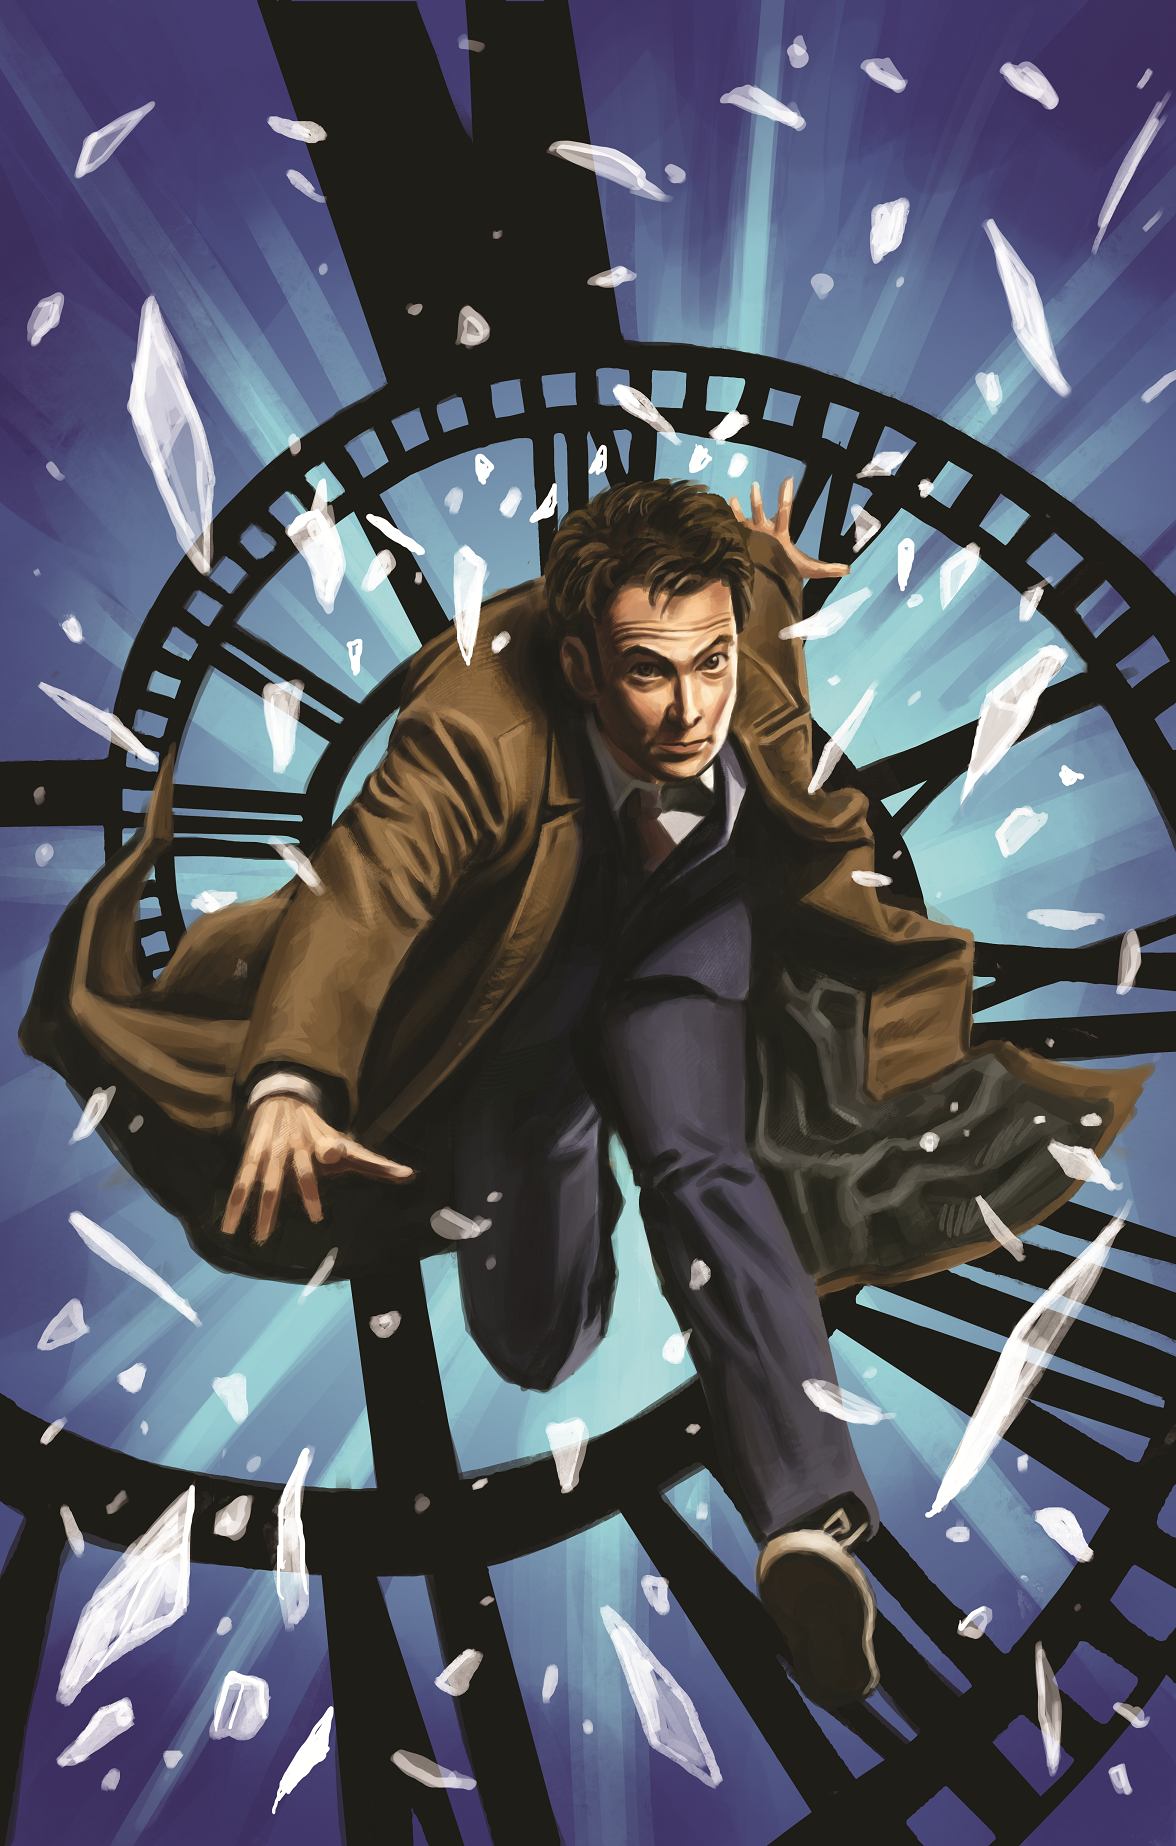 Póster Dr. Who Mecánico